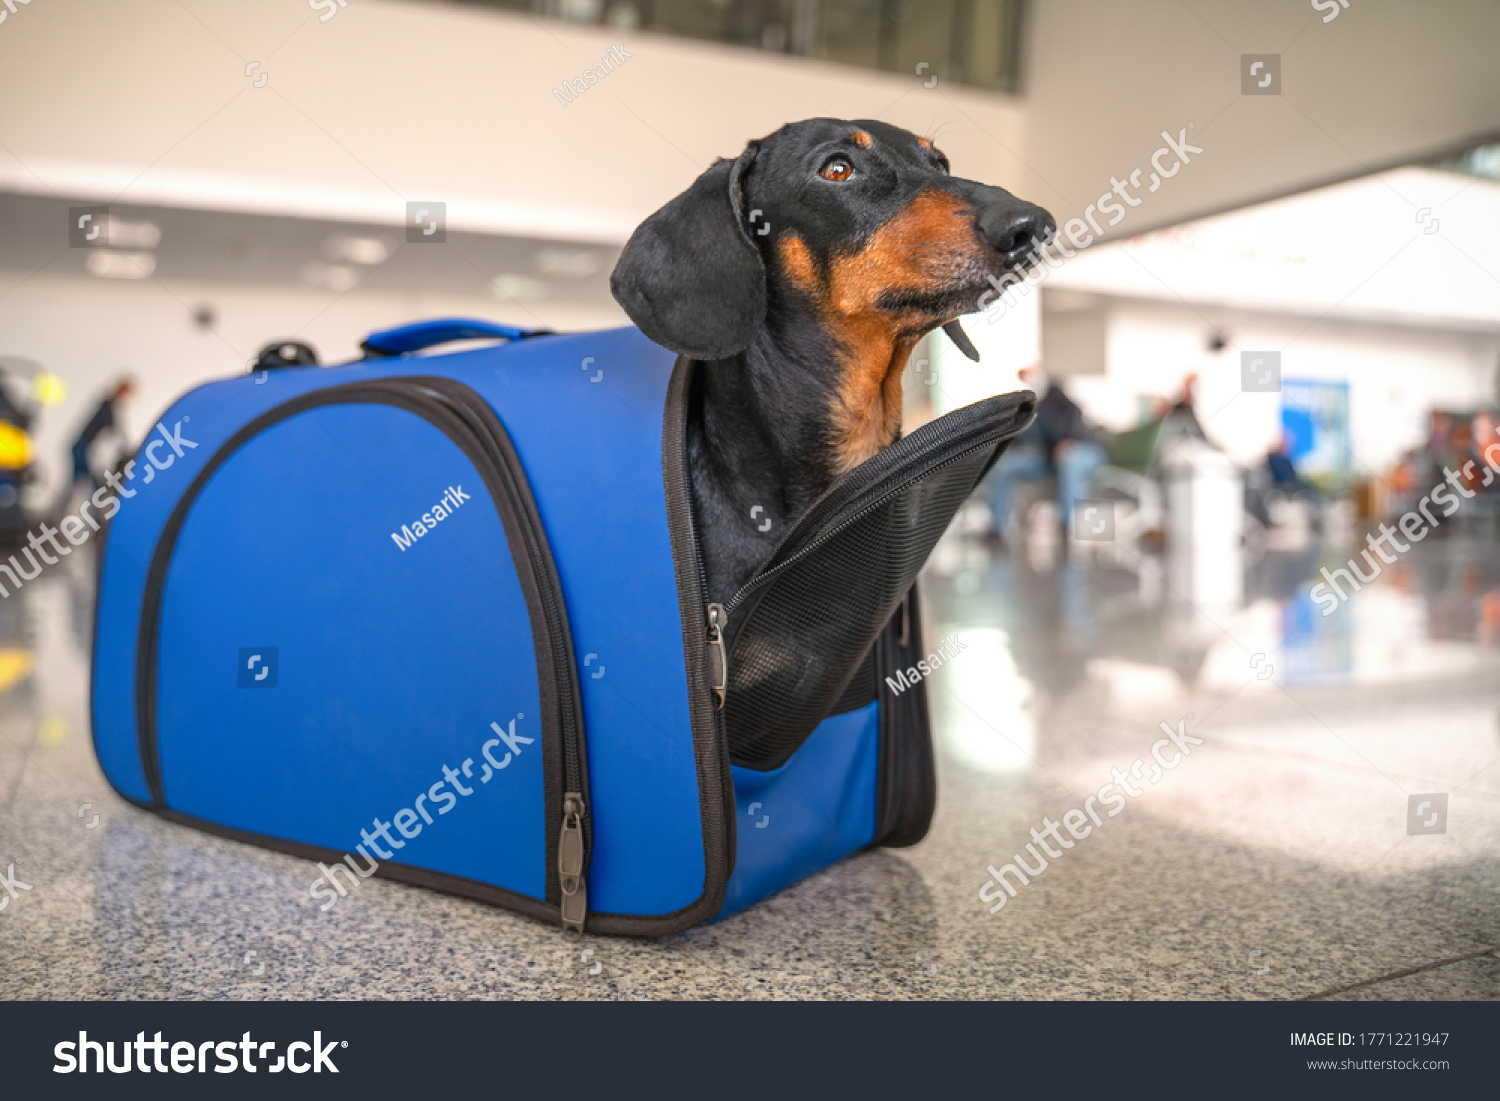 Obedient dachshund dog sits in almost closed blue pet carrier at airport or train station, looks up and waits owner. Safe travel with animals. Customs quarantine to transporting animals across border. #1771221947